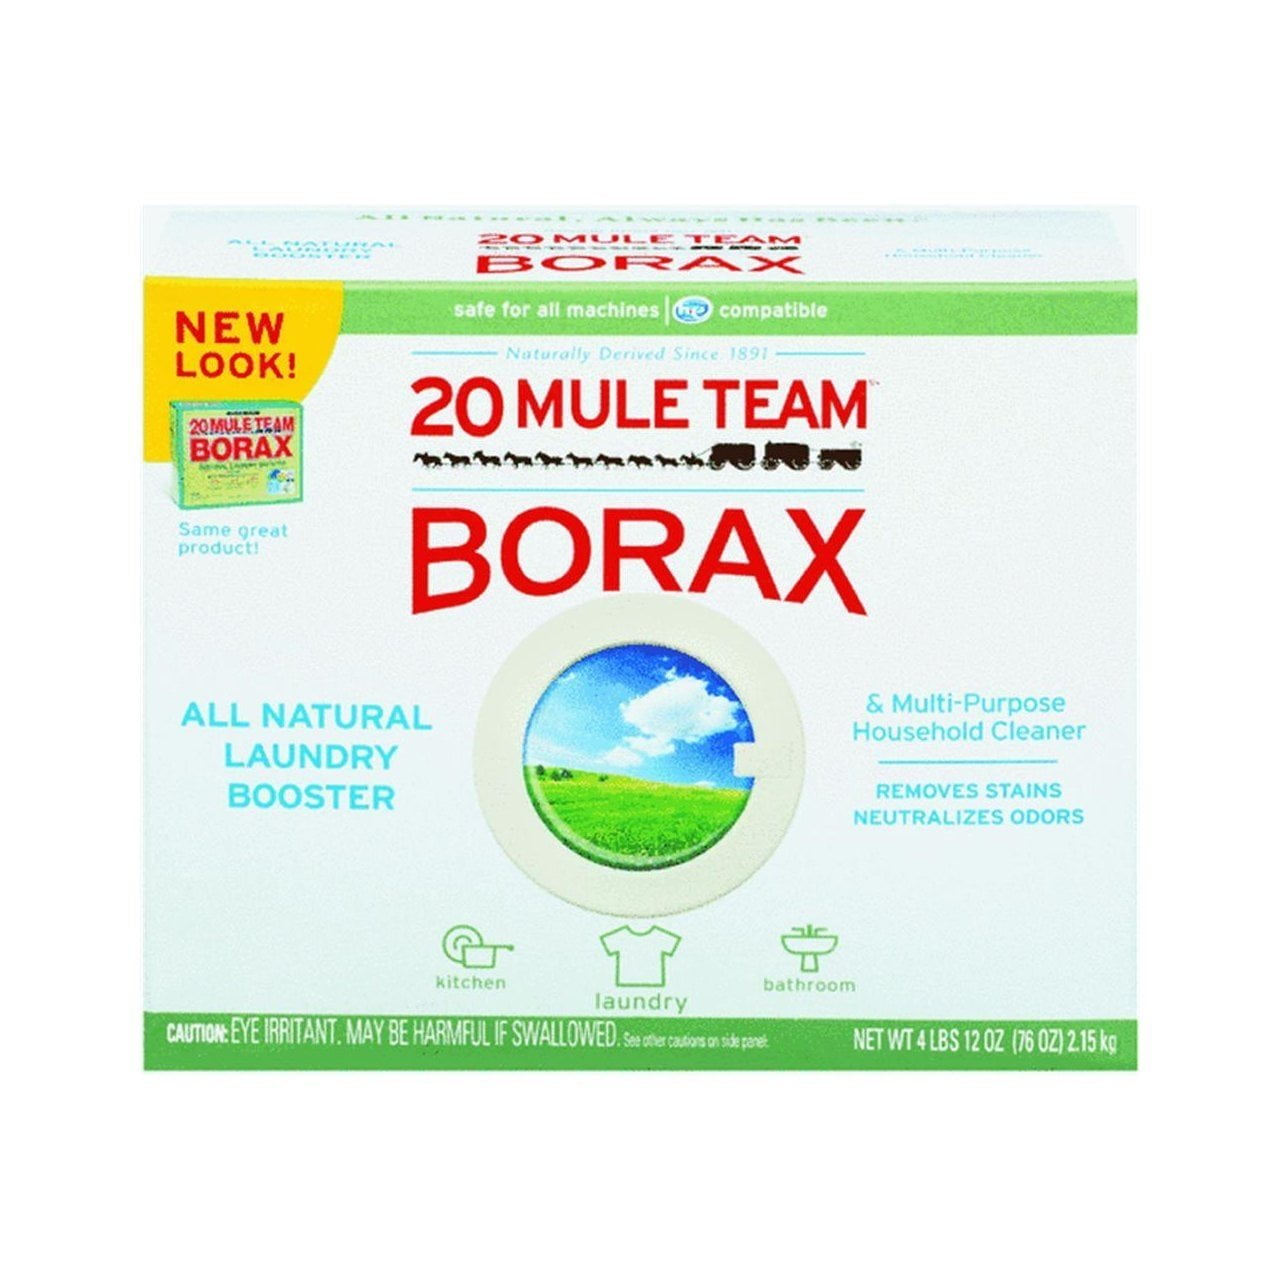 2 BAGS OF 20 MULE-TEAM BORAX LAUNDRY SOAP ADVERTISING PROMO MARBLES 